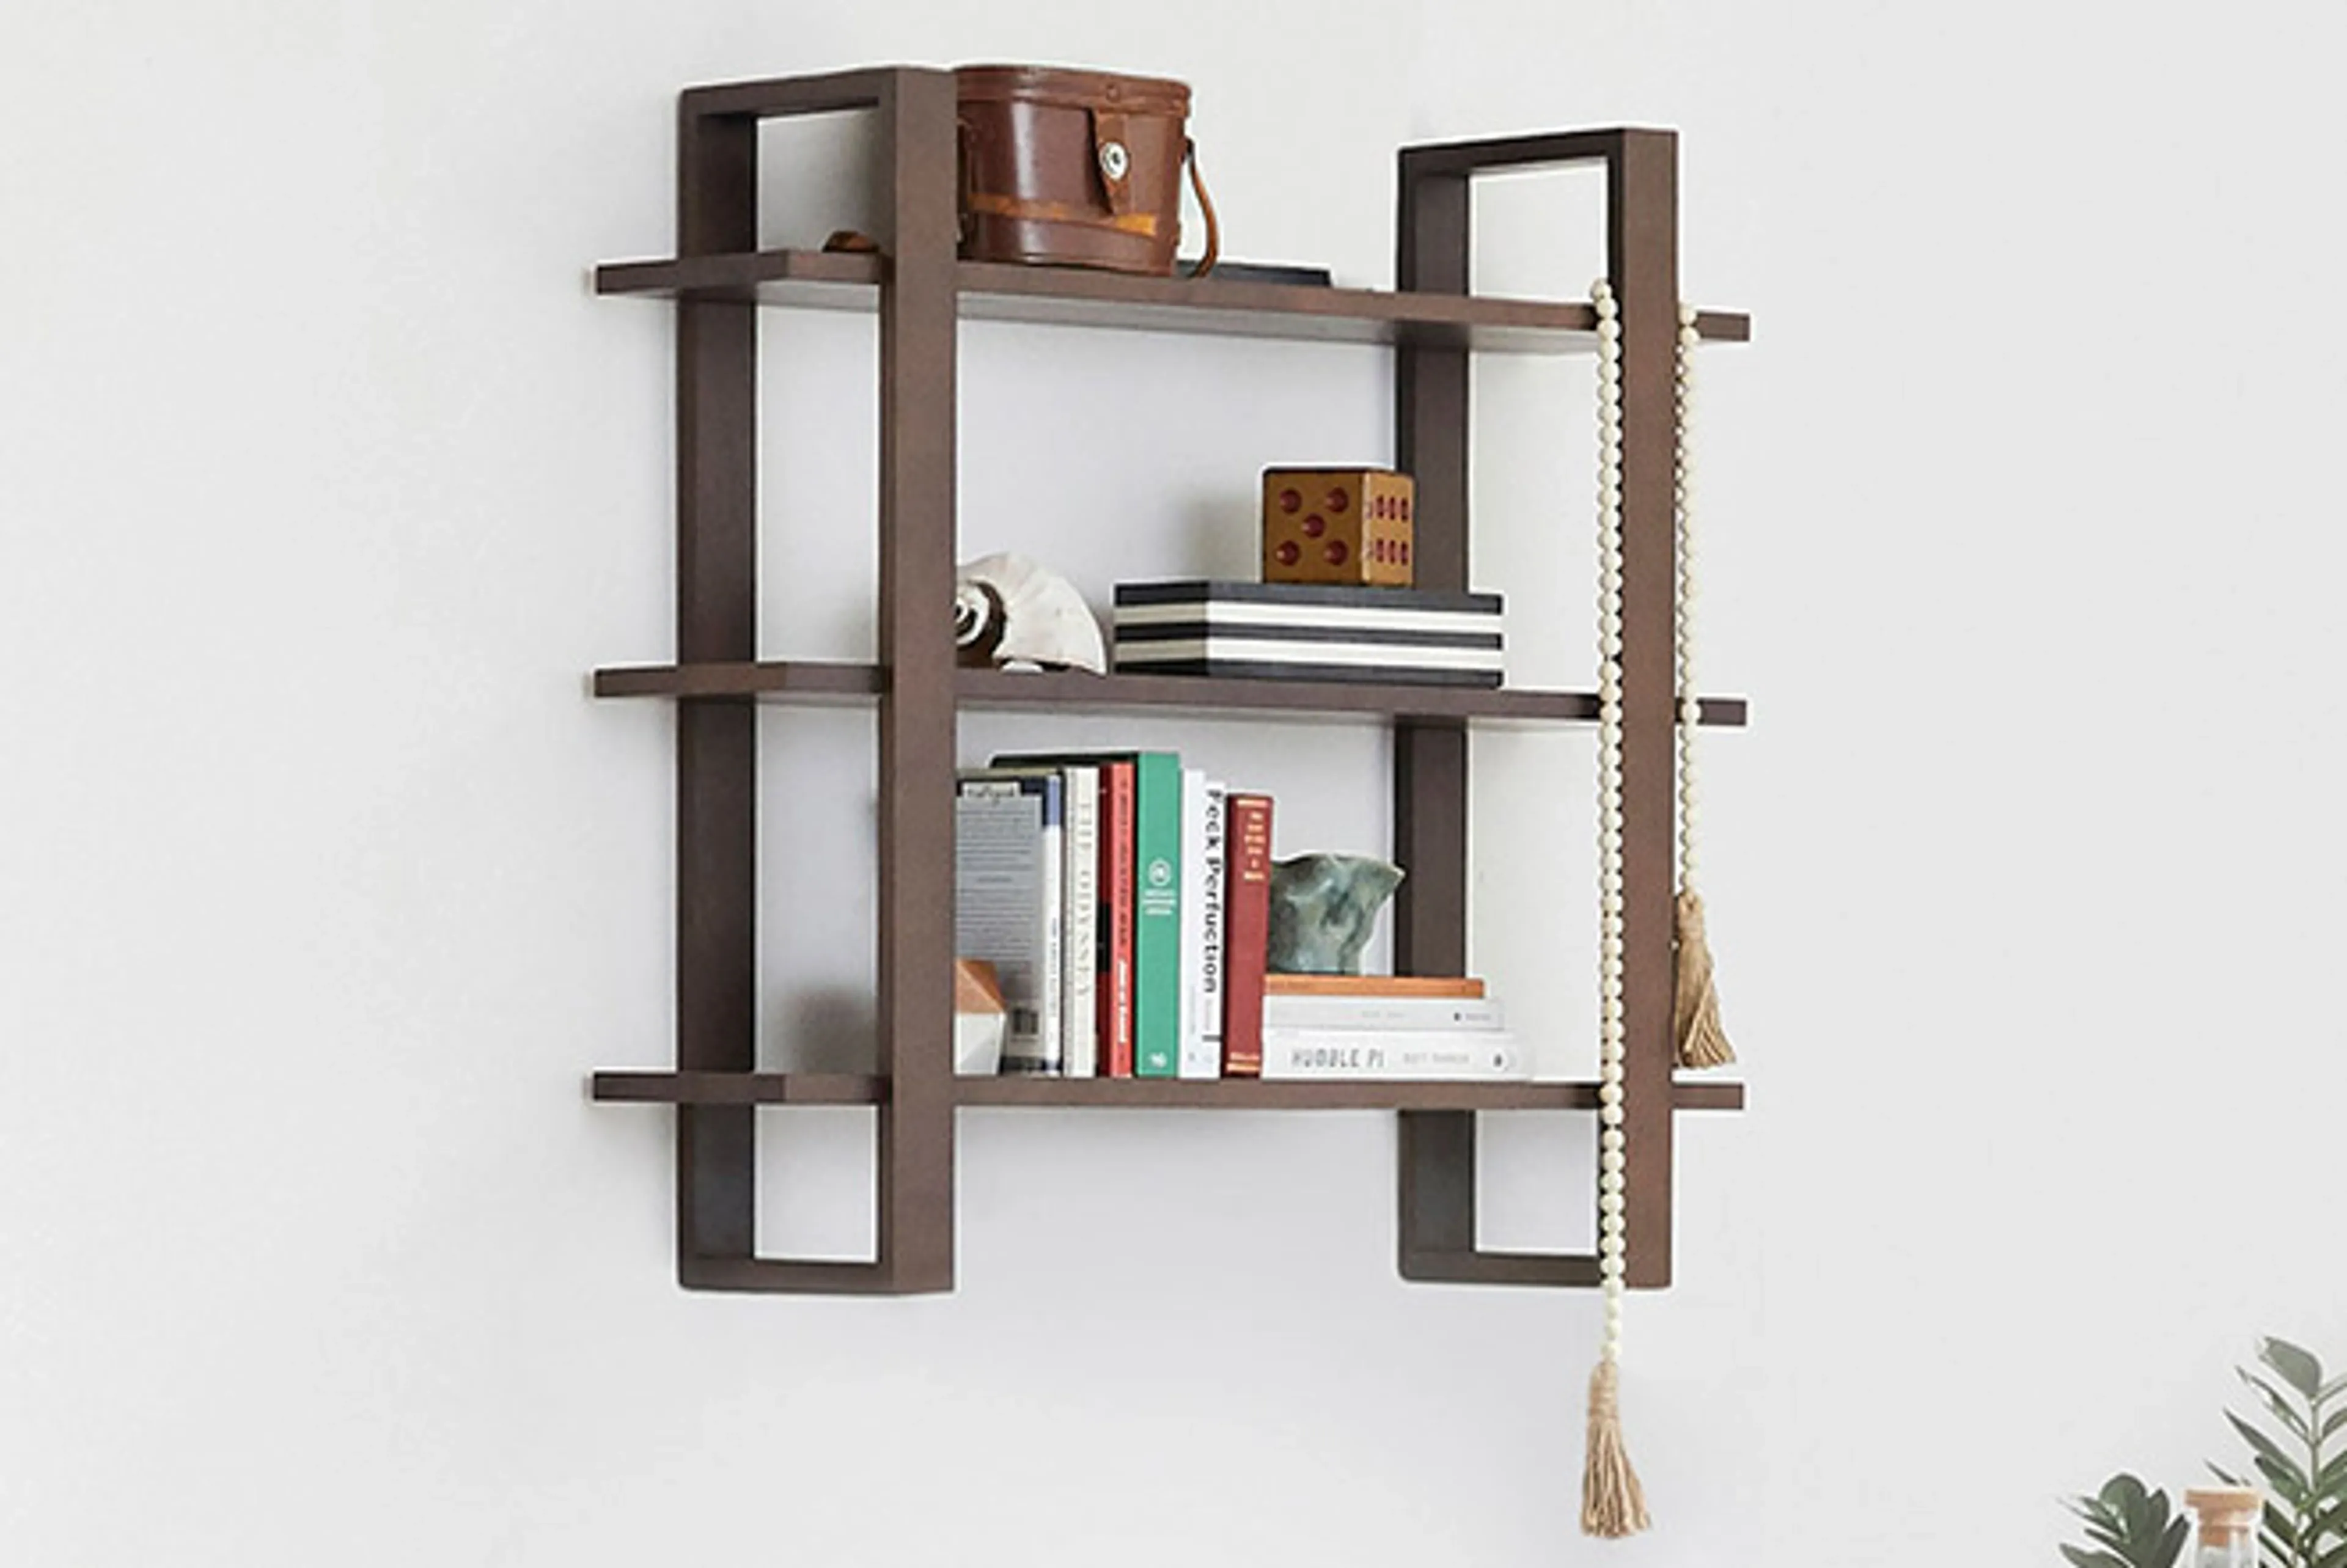 Index shelf in walnut hanging on white wall with books and decor